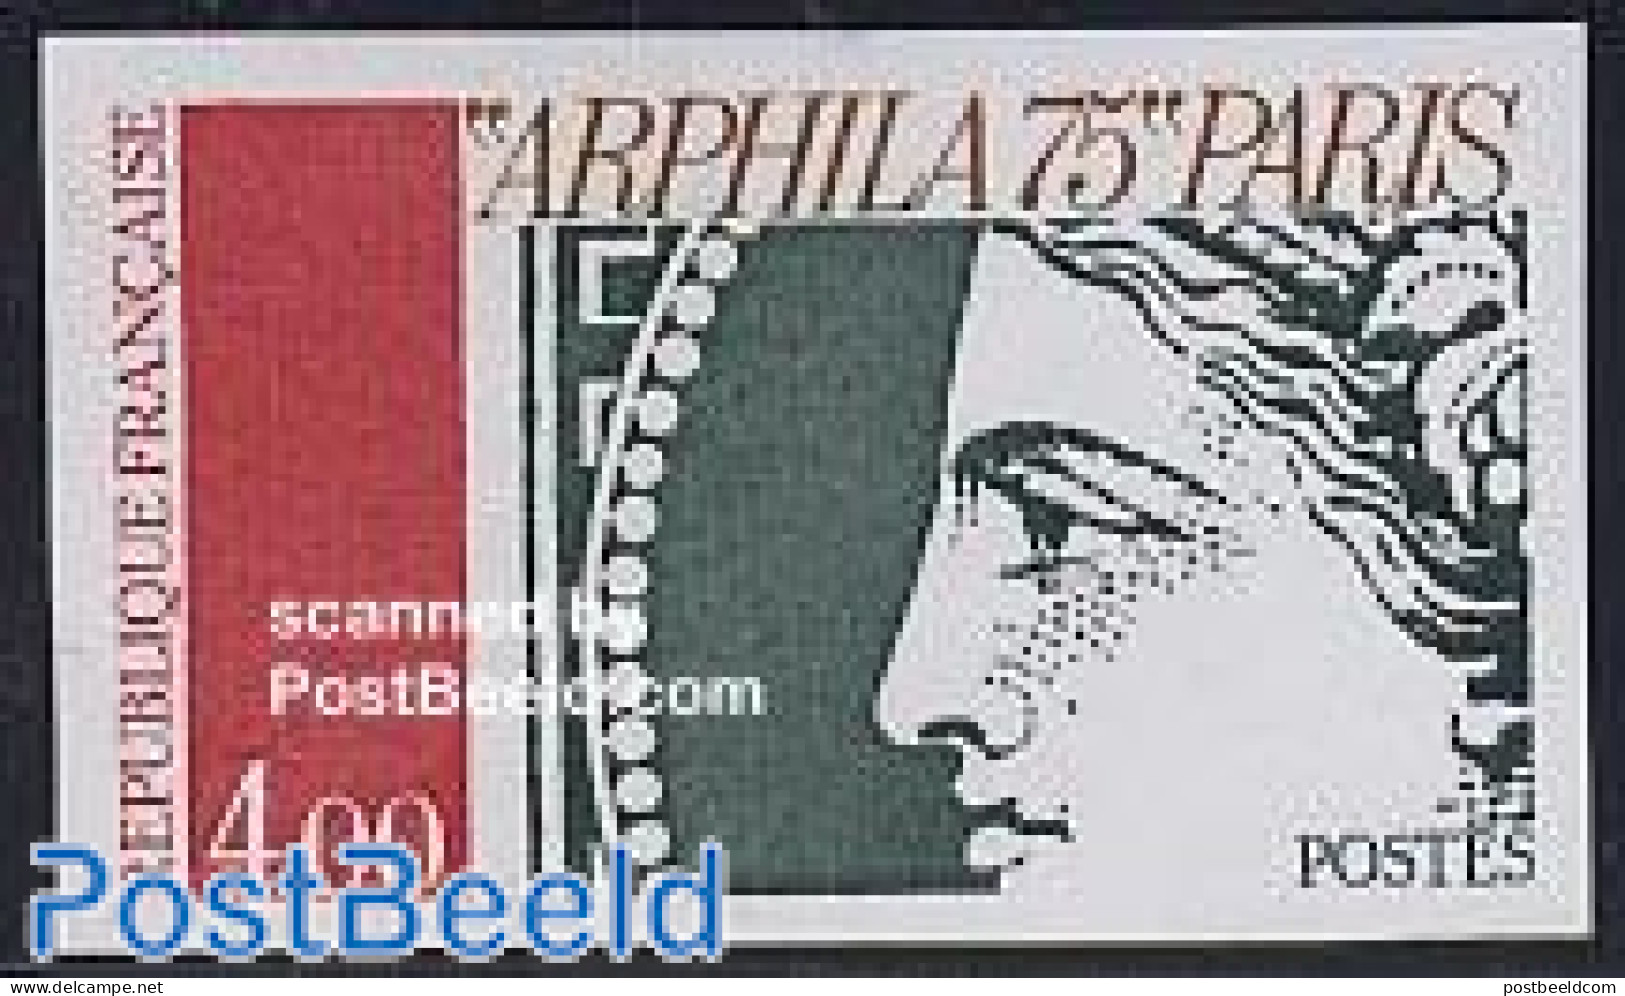 France 1975 Arphila 1v Imperforated, Mint NH, Stamps On Stamps - Ongebruikt